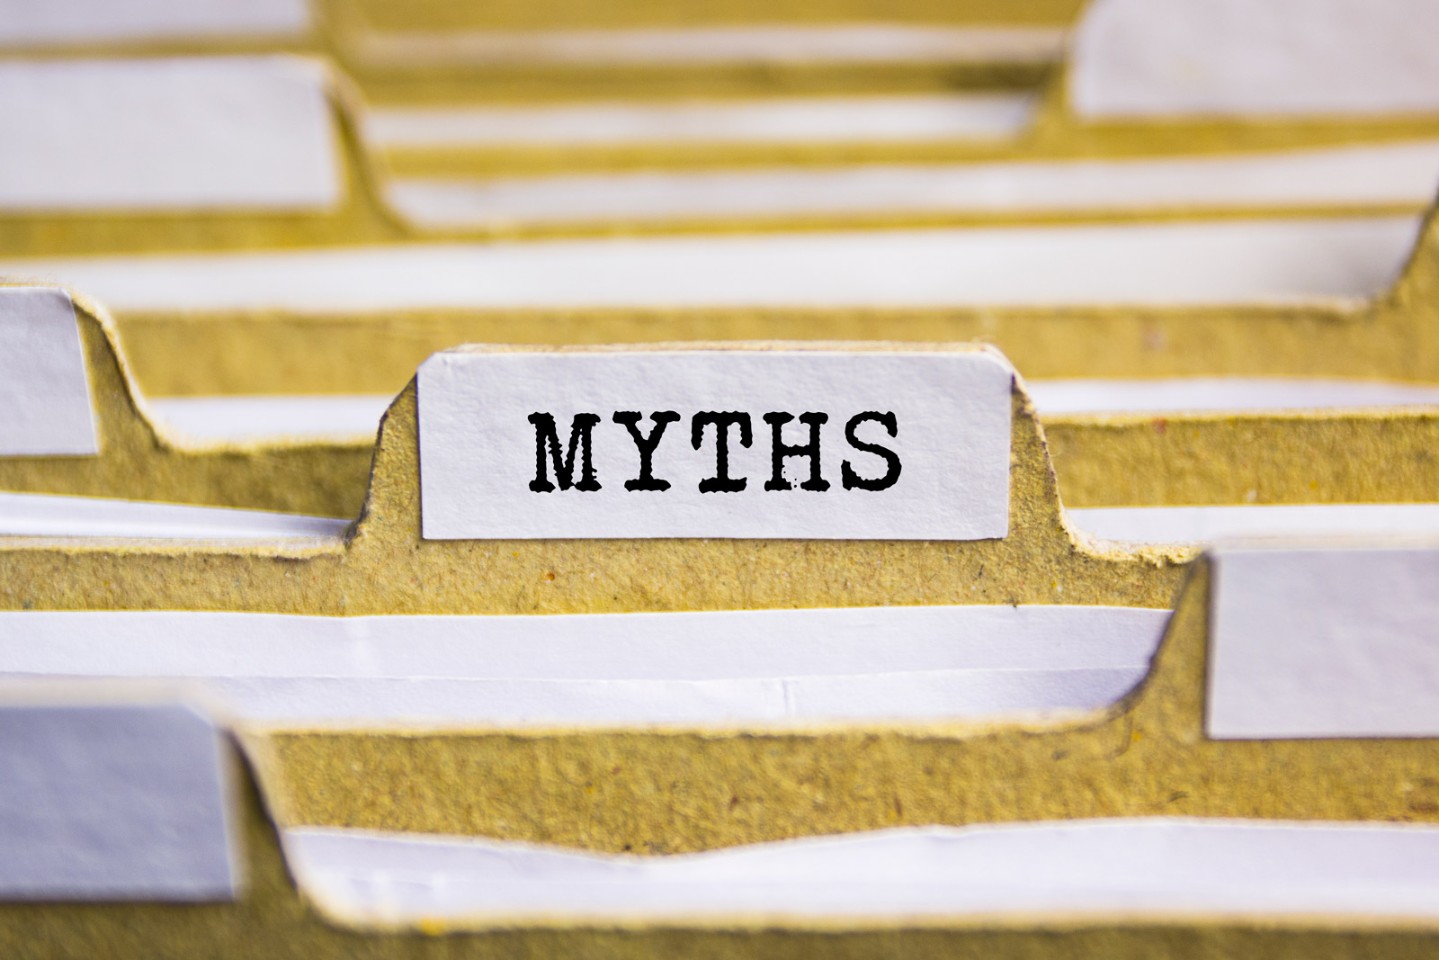 File folders in a row, focused in on one labeled Myths